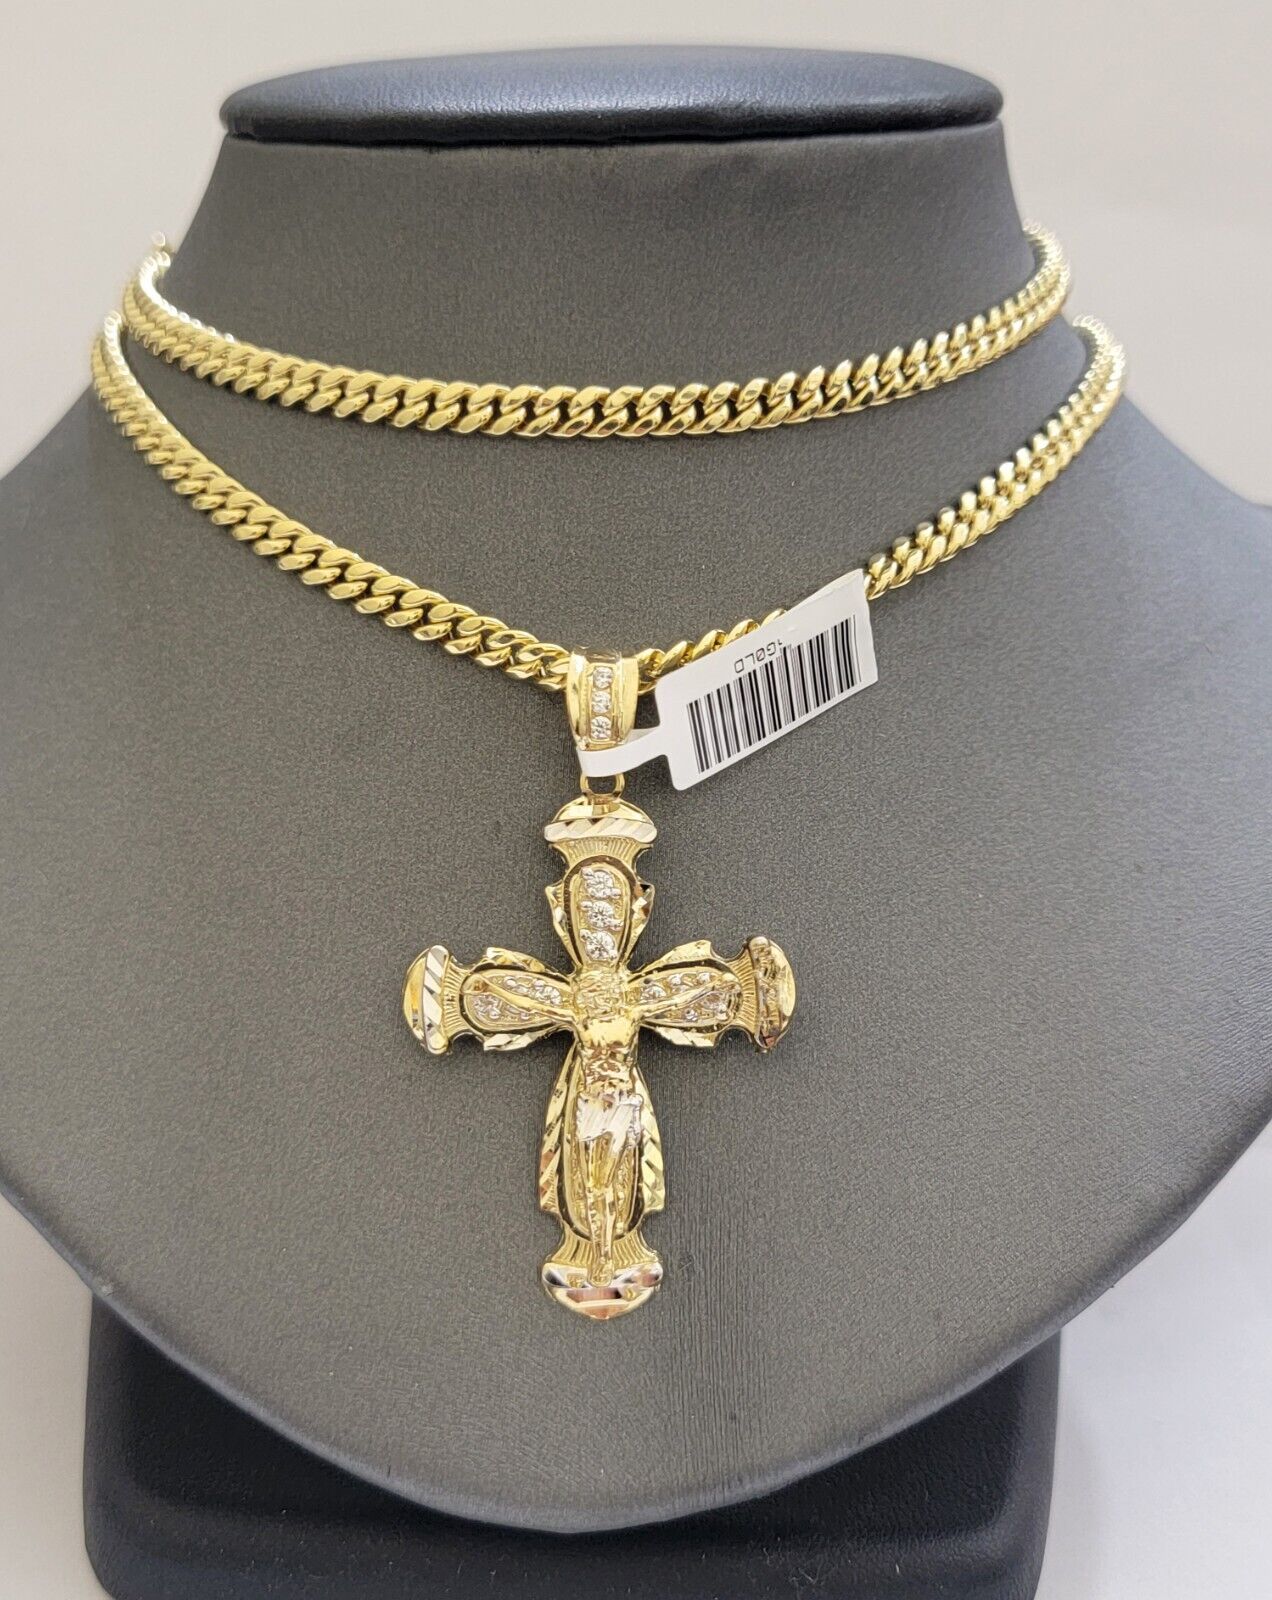 Real 10k Gold Chain & cross charm pendant SET Miami Cuban link necklace 5 mm 20"